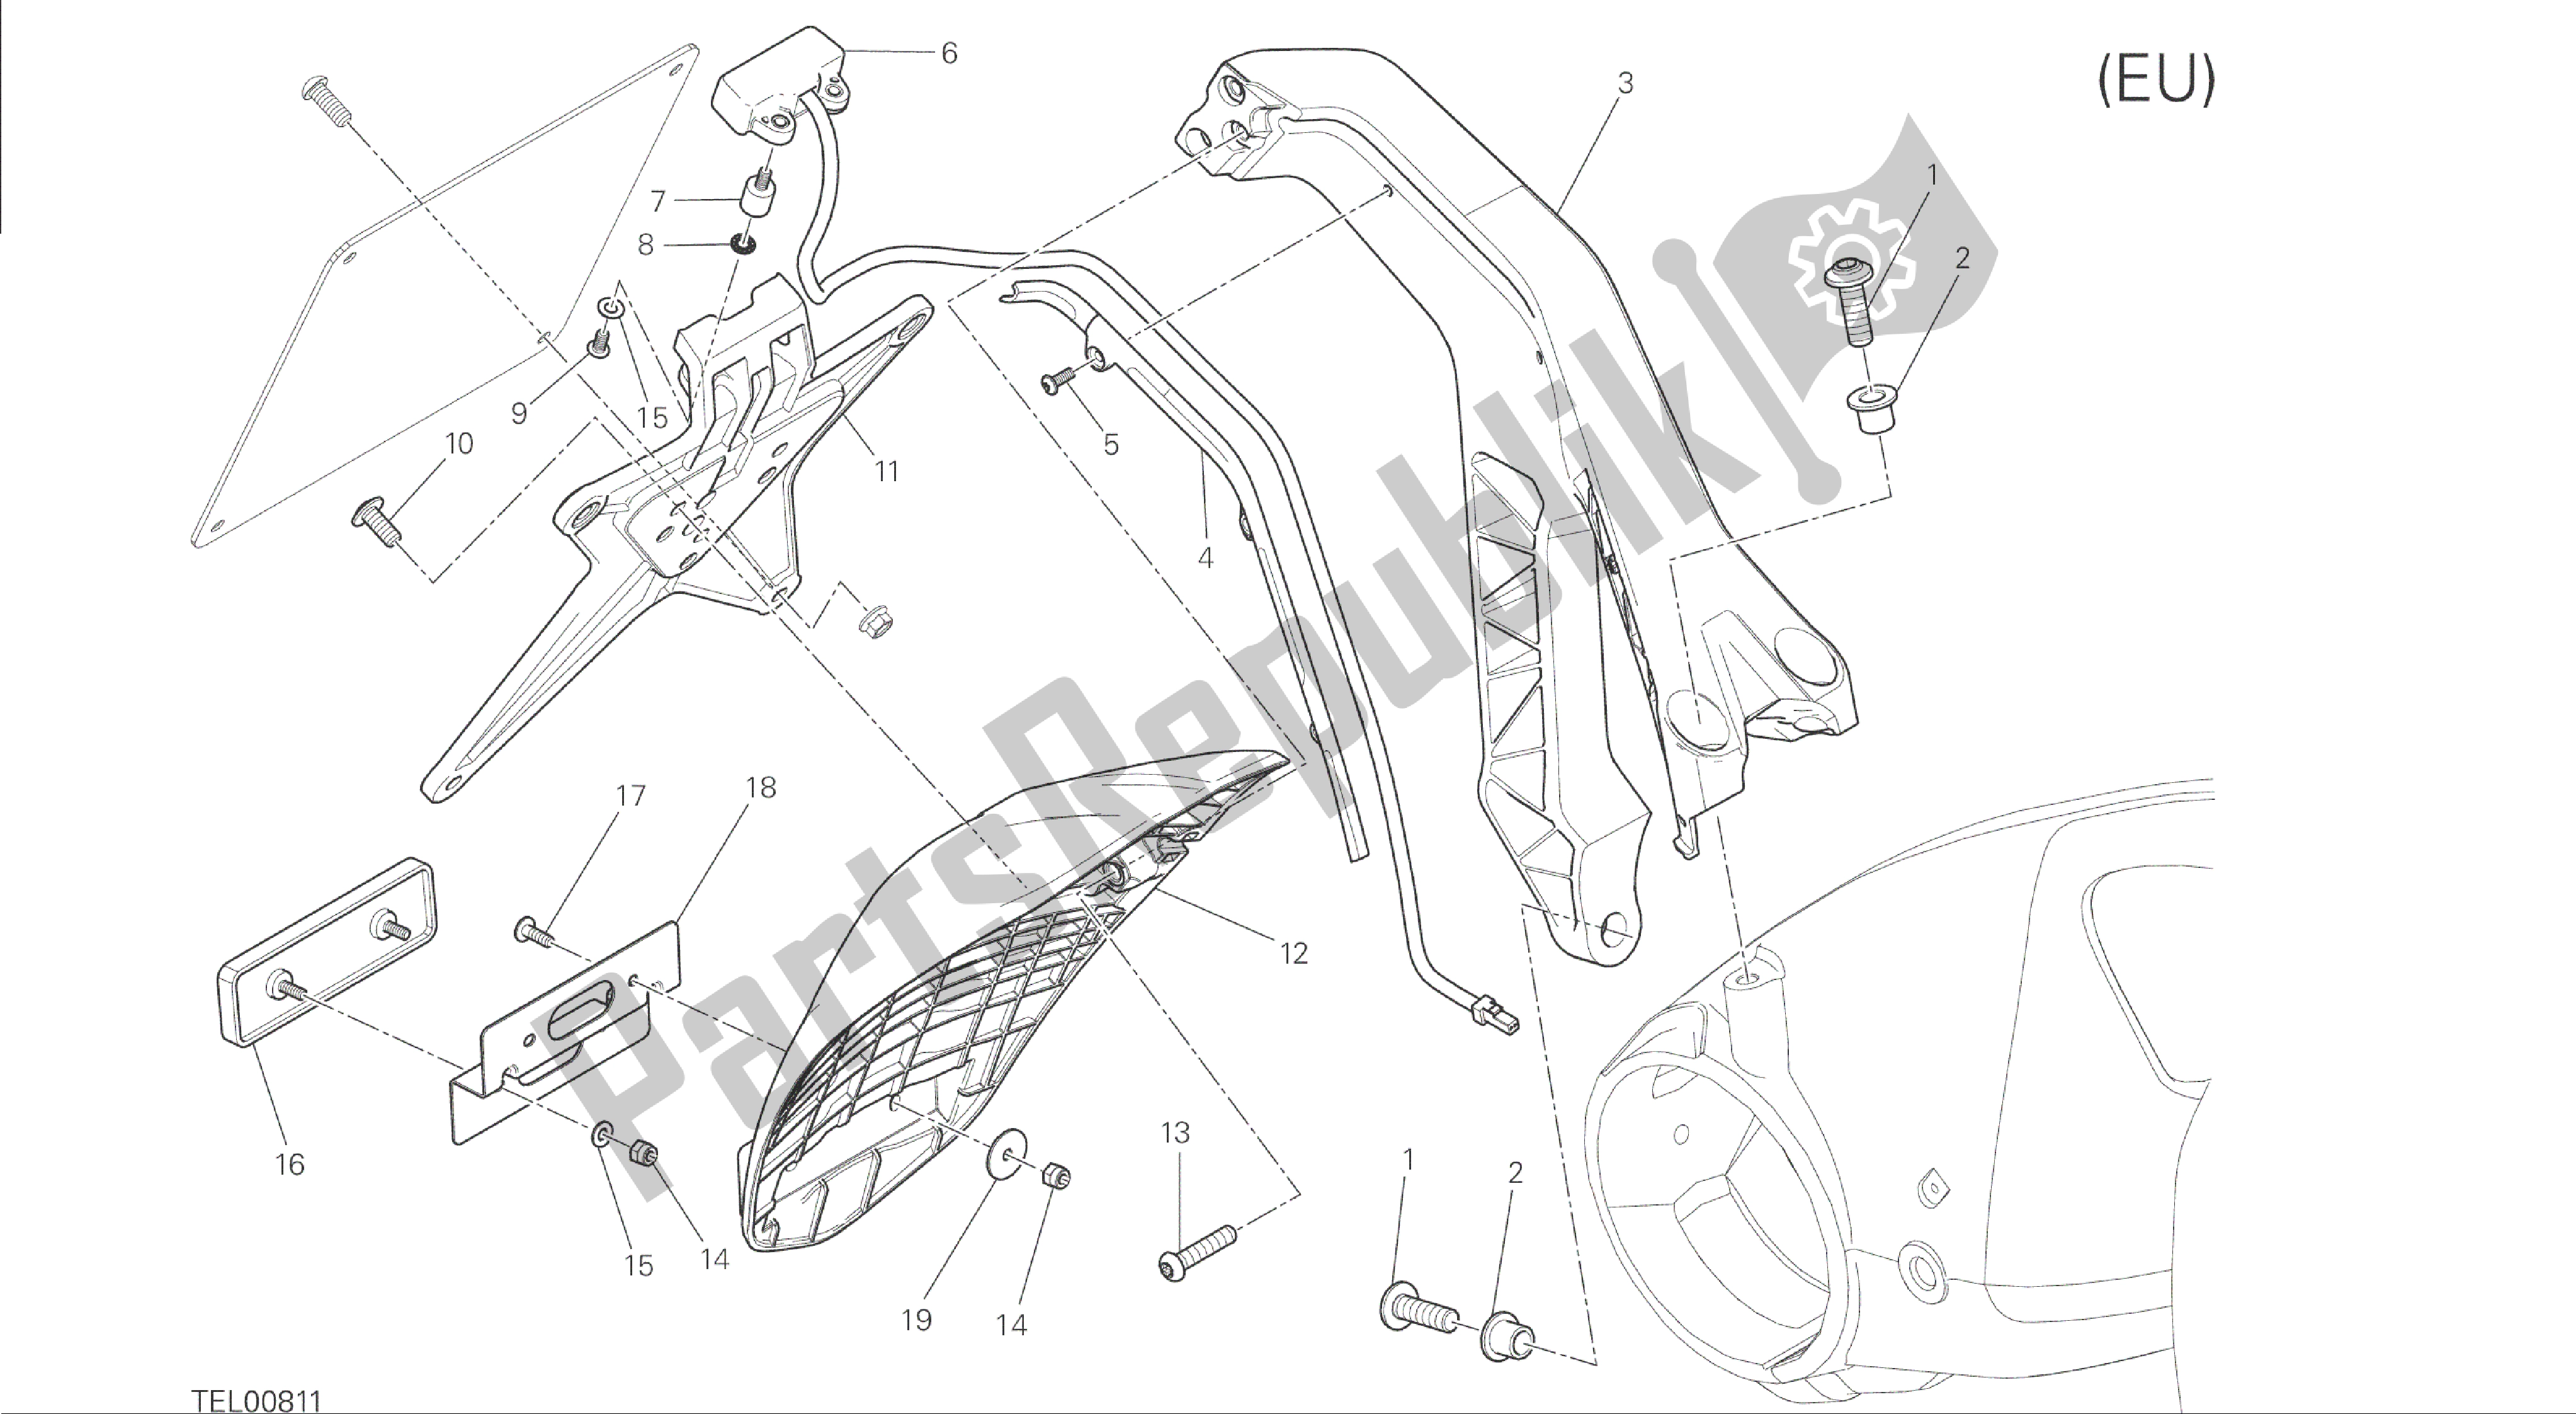 All parts for the Drawing 28b - Plate Holder [mod:m 1200;xst:eur,fra,jap]group Electric of the Ducati Monster 1200 2014